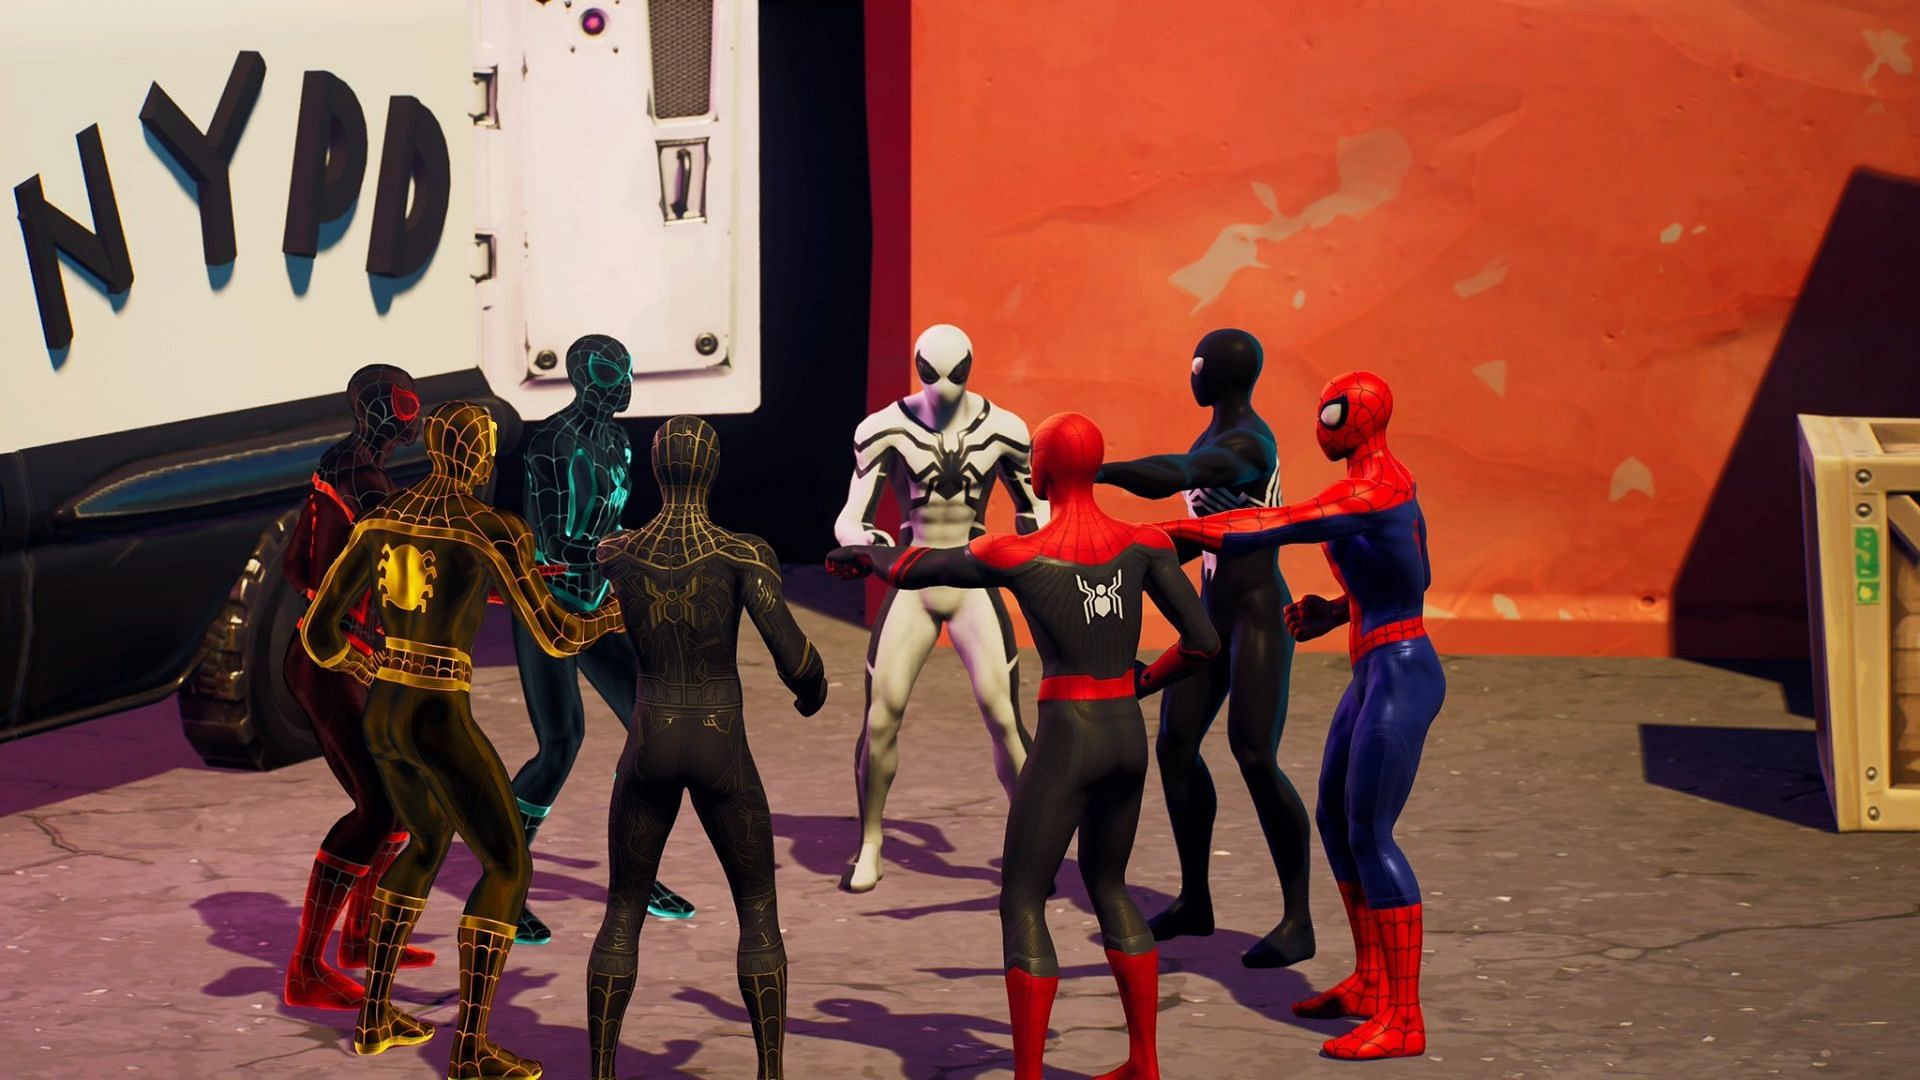 There seems to be a disturbance in the Spider-Verse (Image via Twitter/Jaxgreat8)